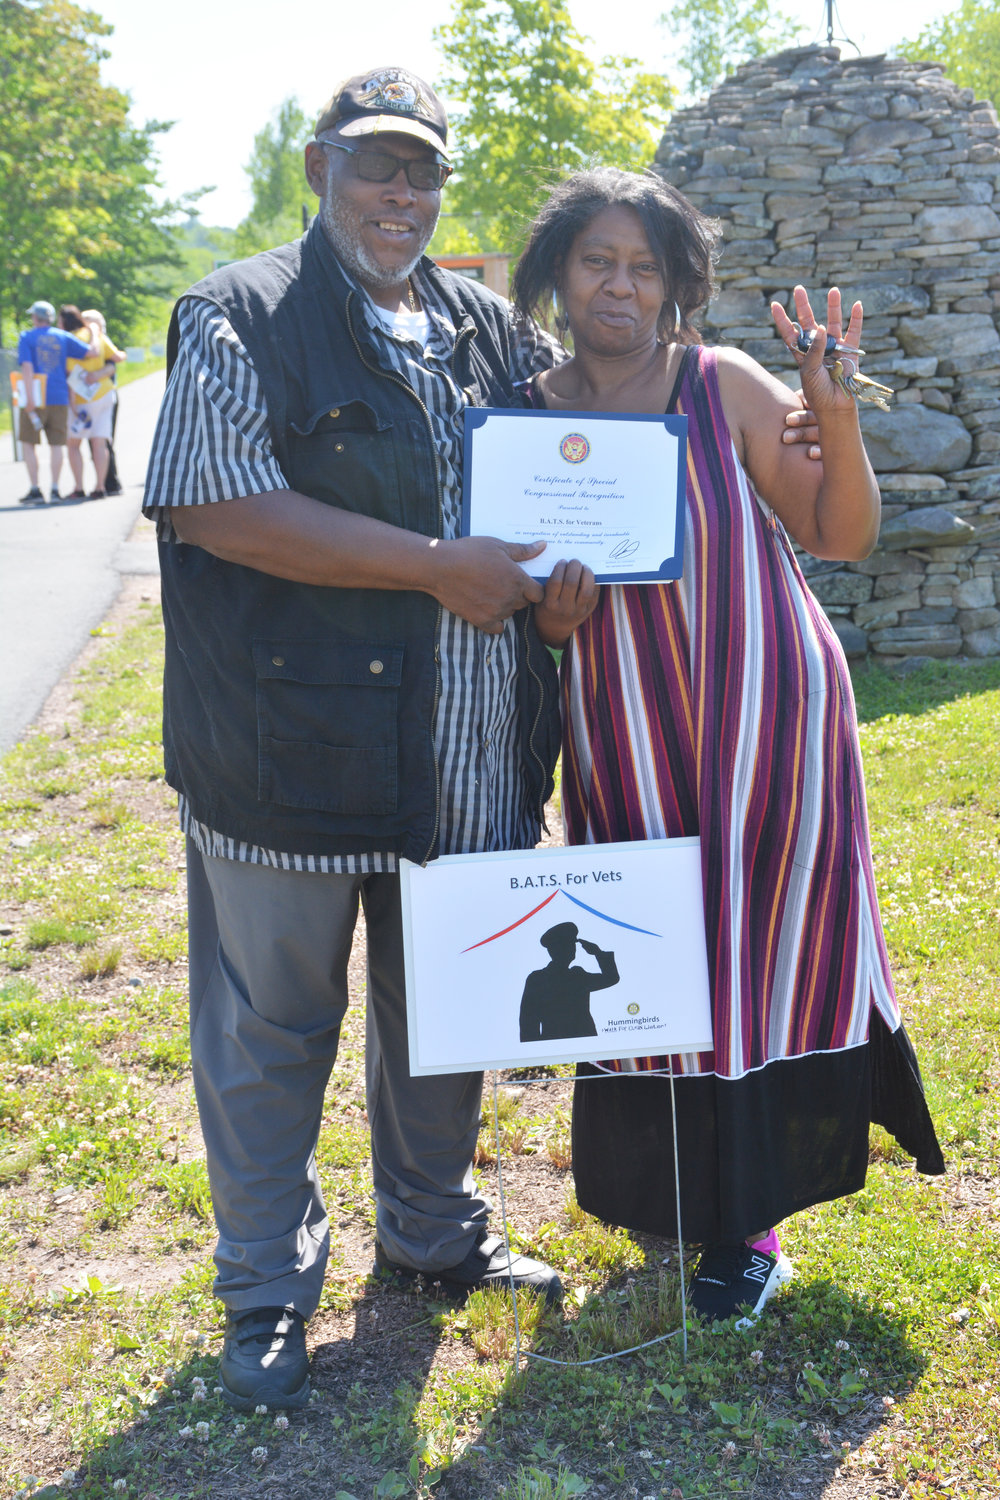 B.A.T.S for Veterans Founder and Chairman Reverend Norman Graves and his wife Rachel accepted the Hummingbird Award on the organization’s behalf. B.A.T.S. provides transitional housing and supportive services for local homeless veterans.